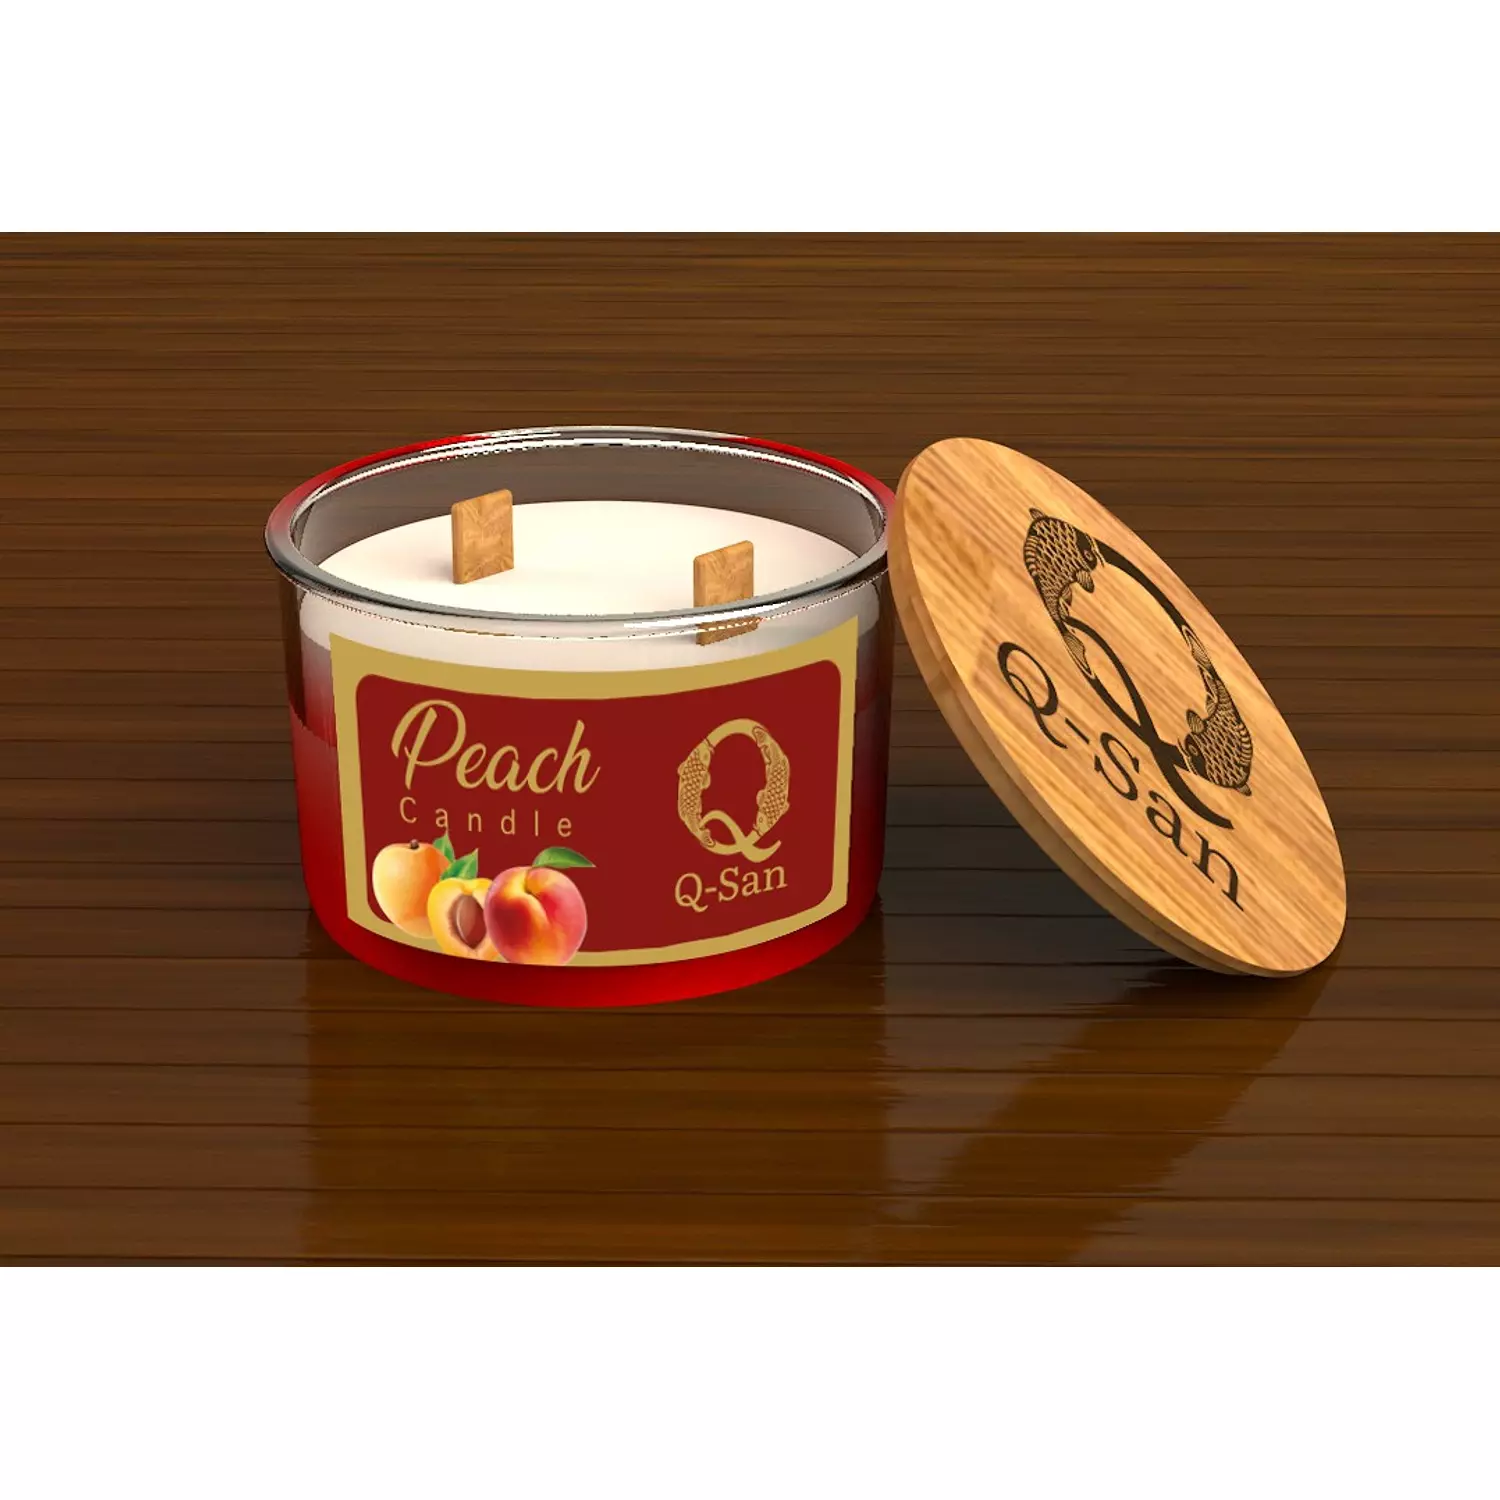 Peach Candle hover image